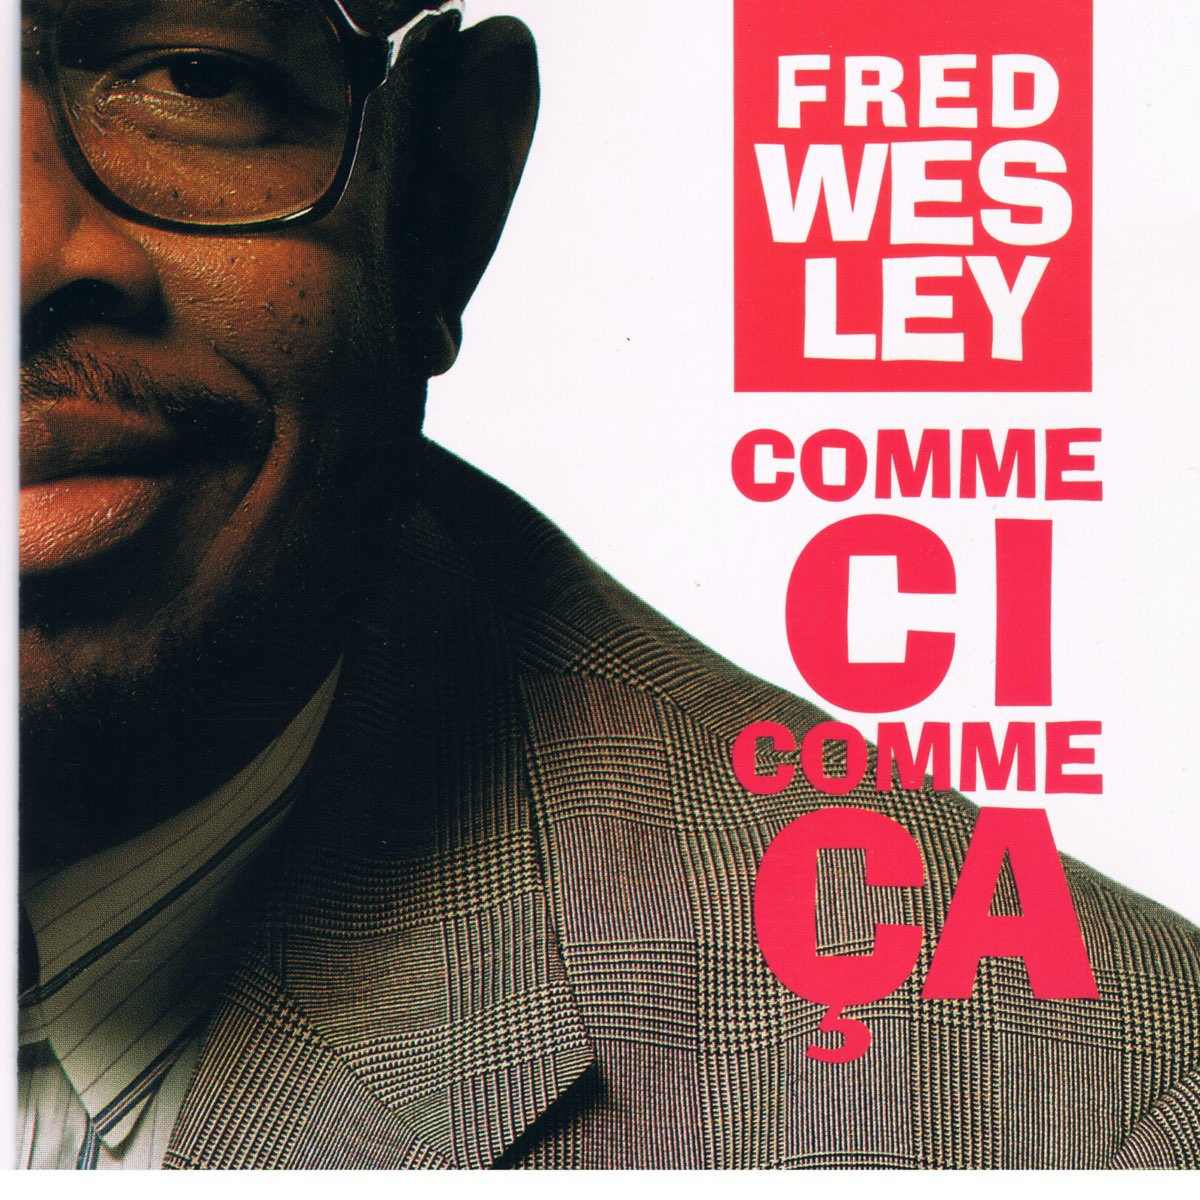 Fred Wesley. Comme ci comme CA Вики. French Affair comme ci comme CA. Fred Wesley blow your head. Comme ci comme ca french